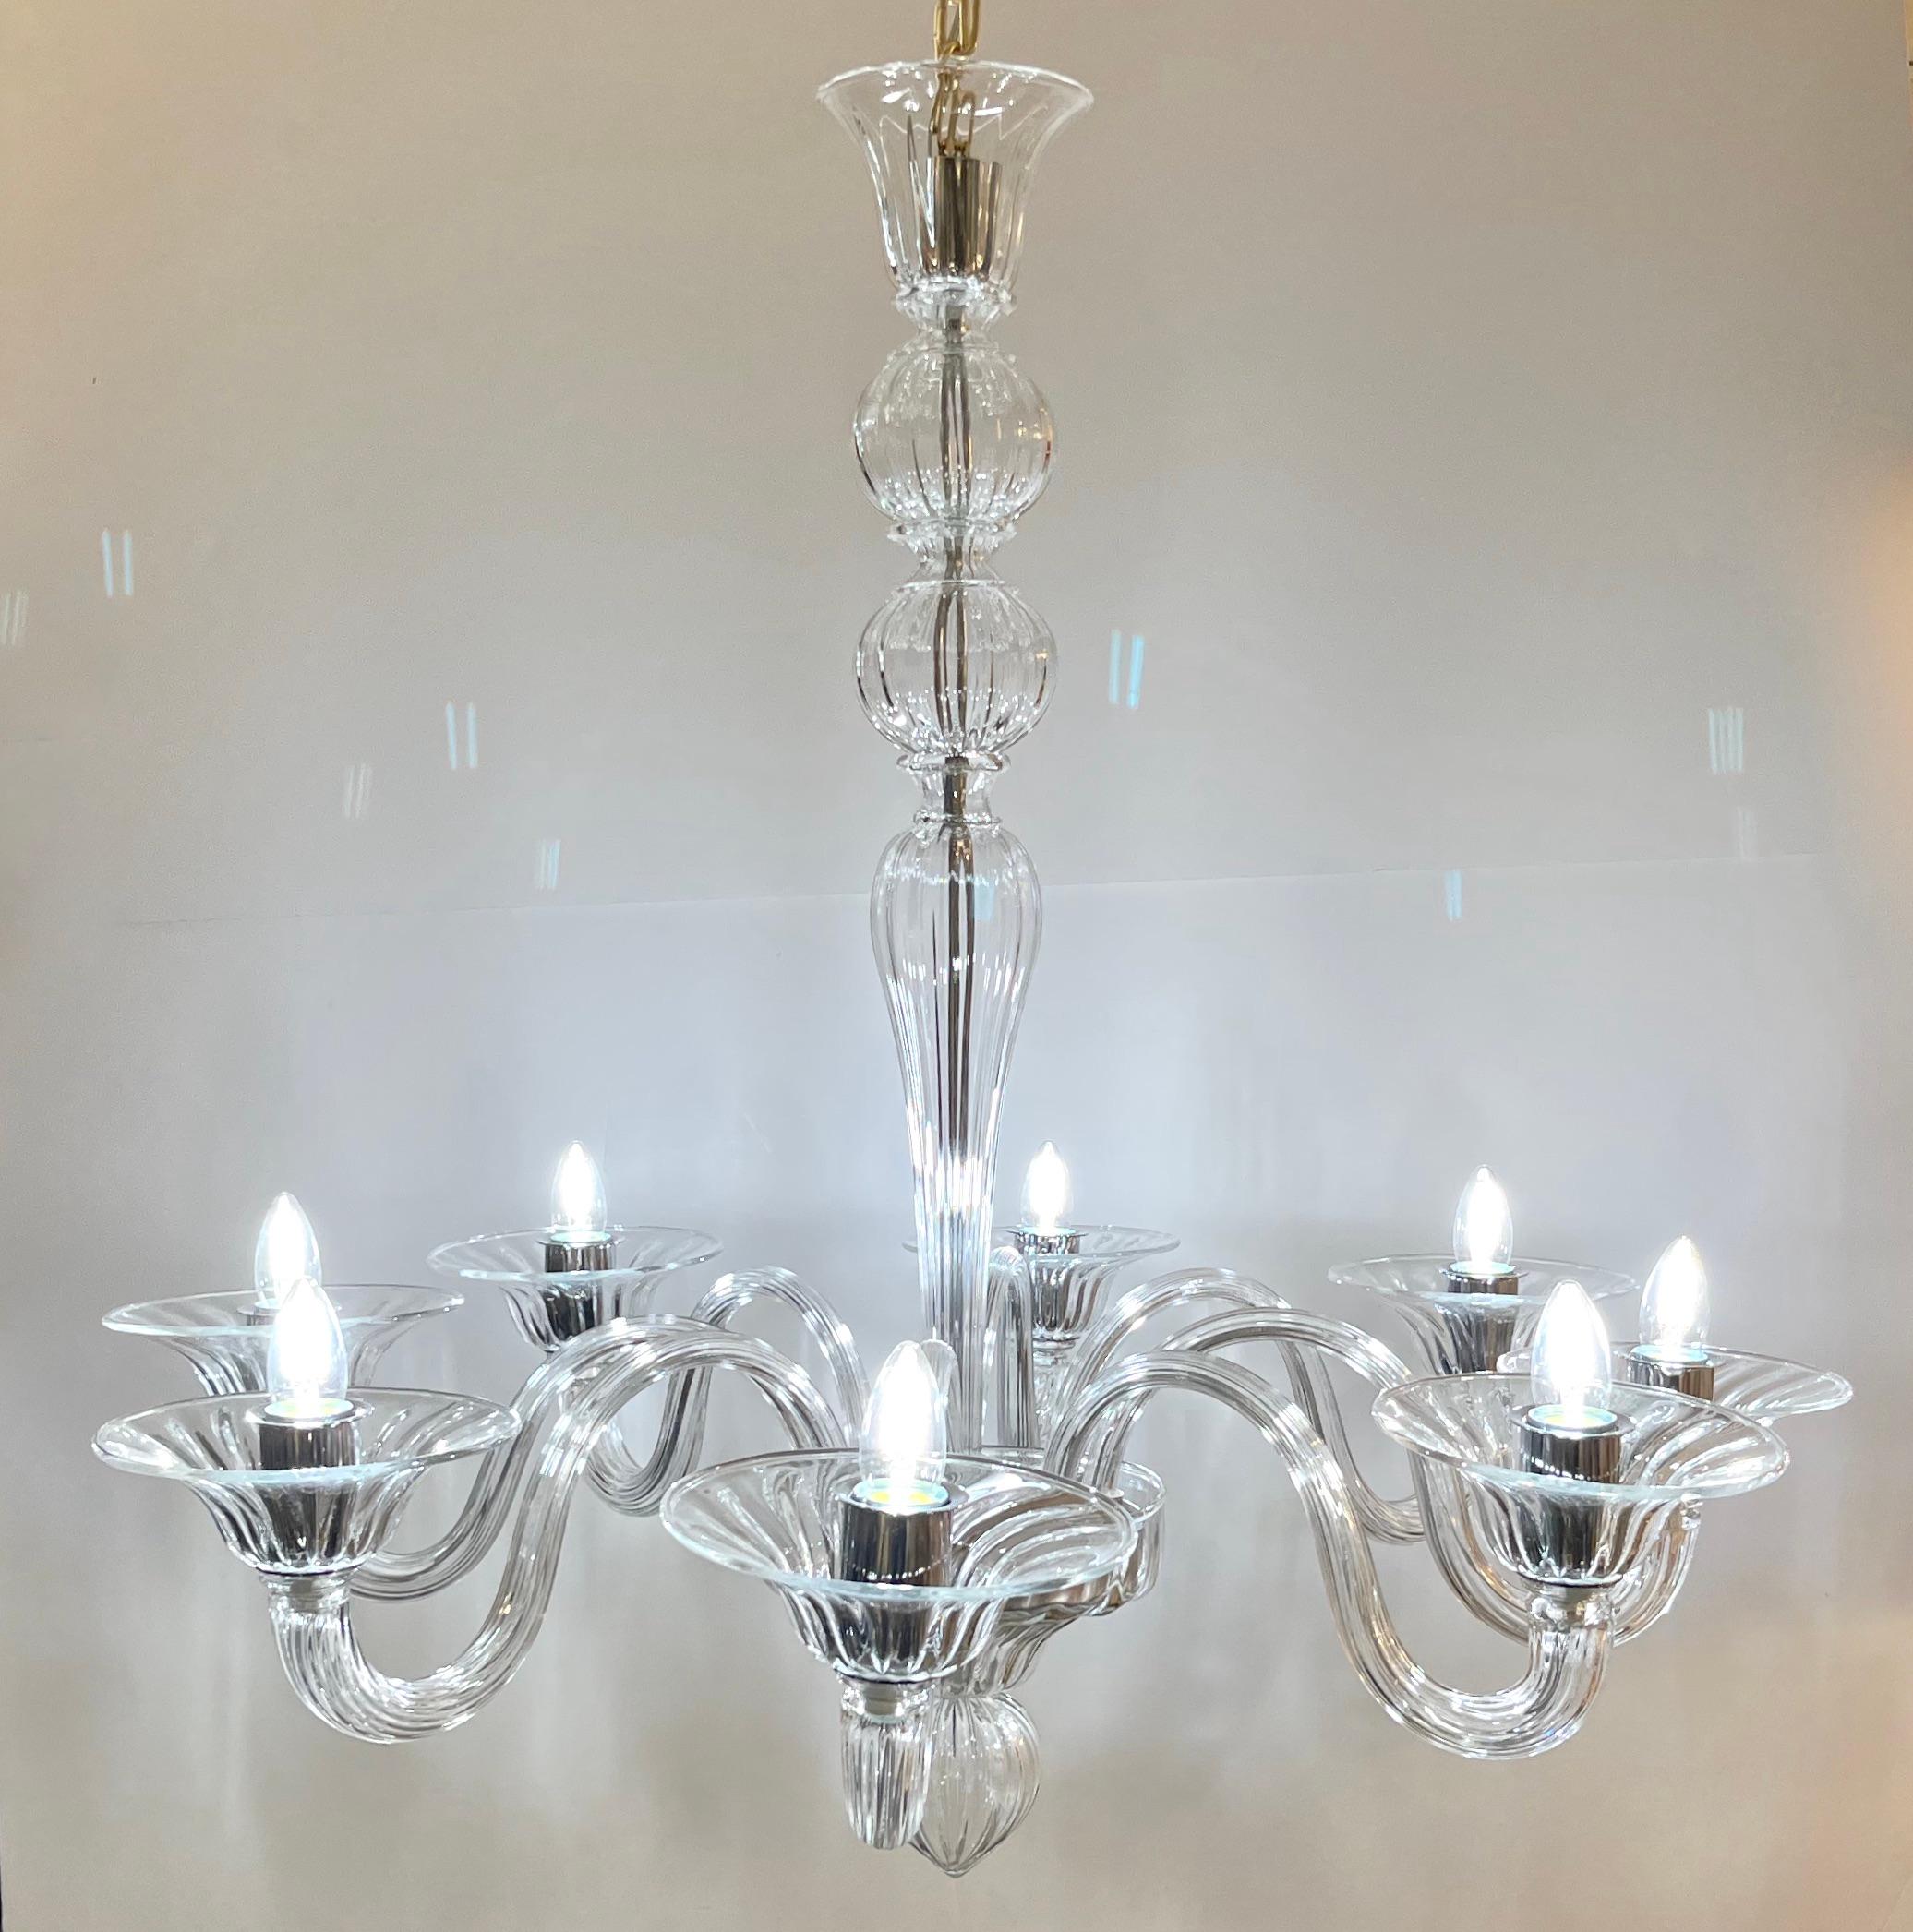 Minimalist modern creation of the traditional Venetian Chandelier, 8 lights, in artistic blown crystal Murano glass, entirely hand-crafted in Italy.
This lighting fixture in Murano glass is characterized by superb sinuous simplicity. It is inspired